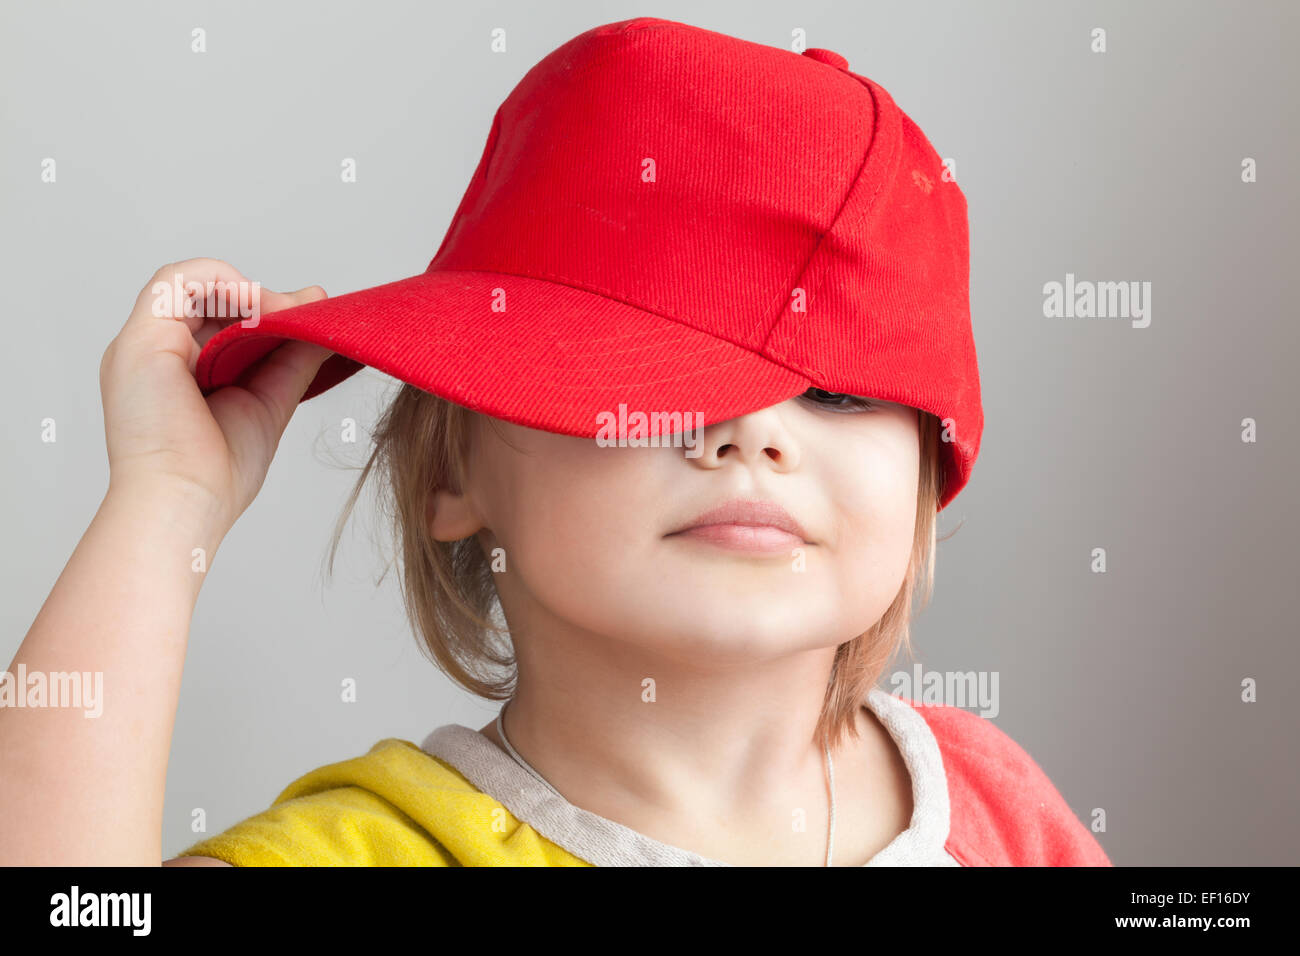 Studio portrait of funny baby girl in red baseball cap over gray wall background Stock Photo